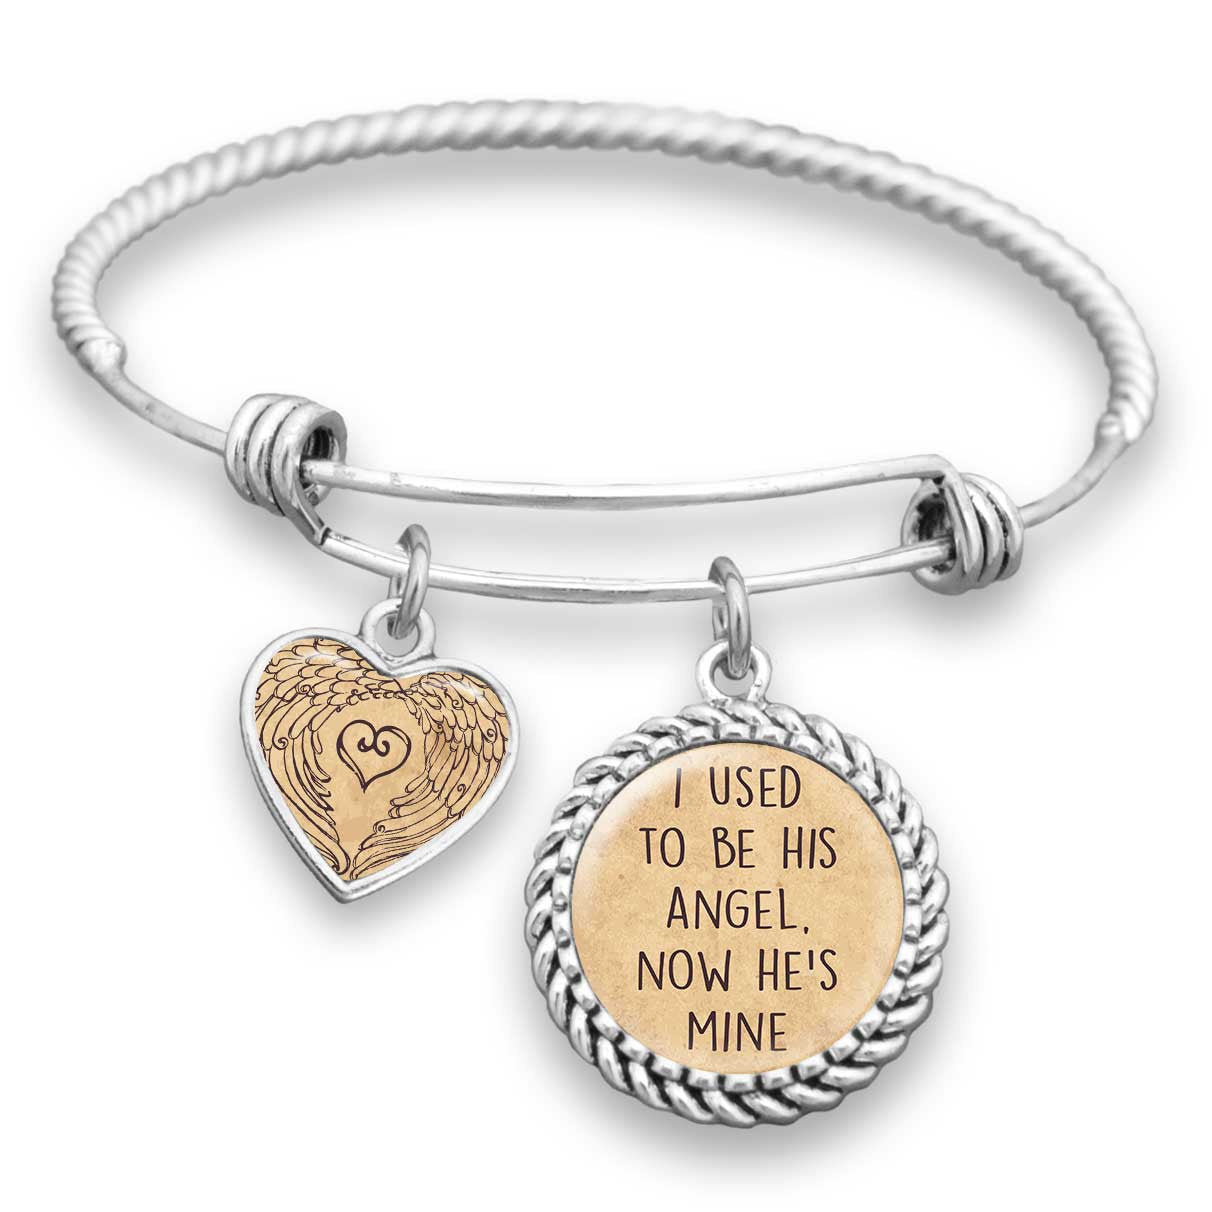 I Used To Be His Angel, Now He's Mine Charm Bracelet